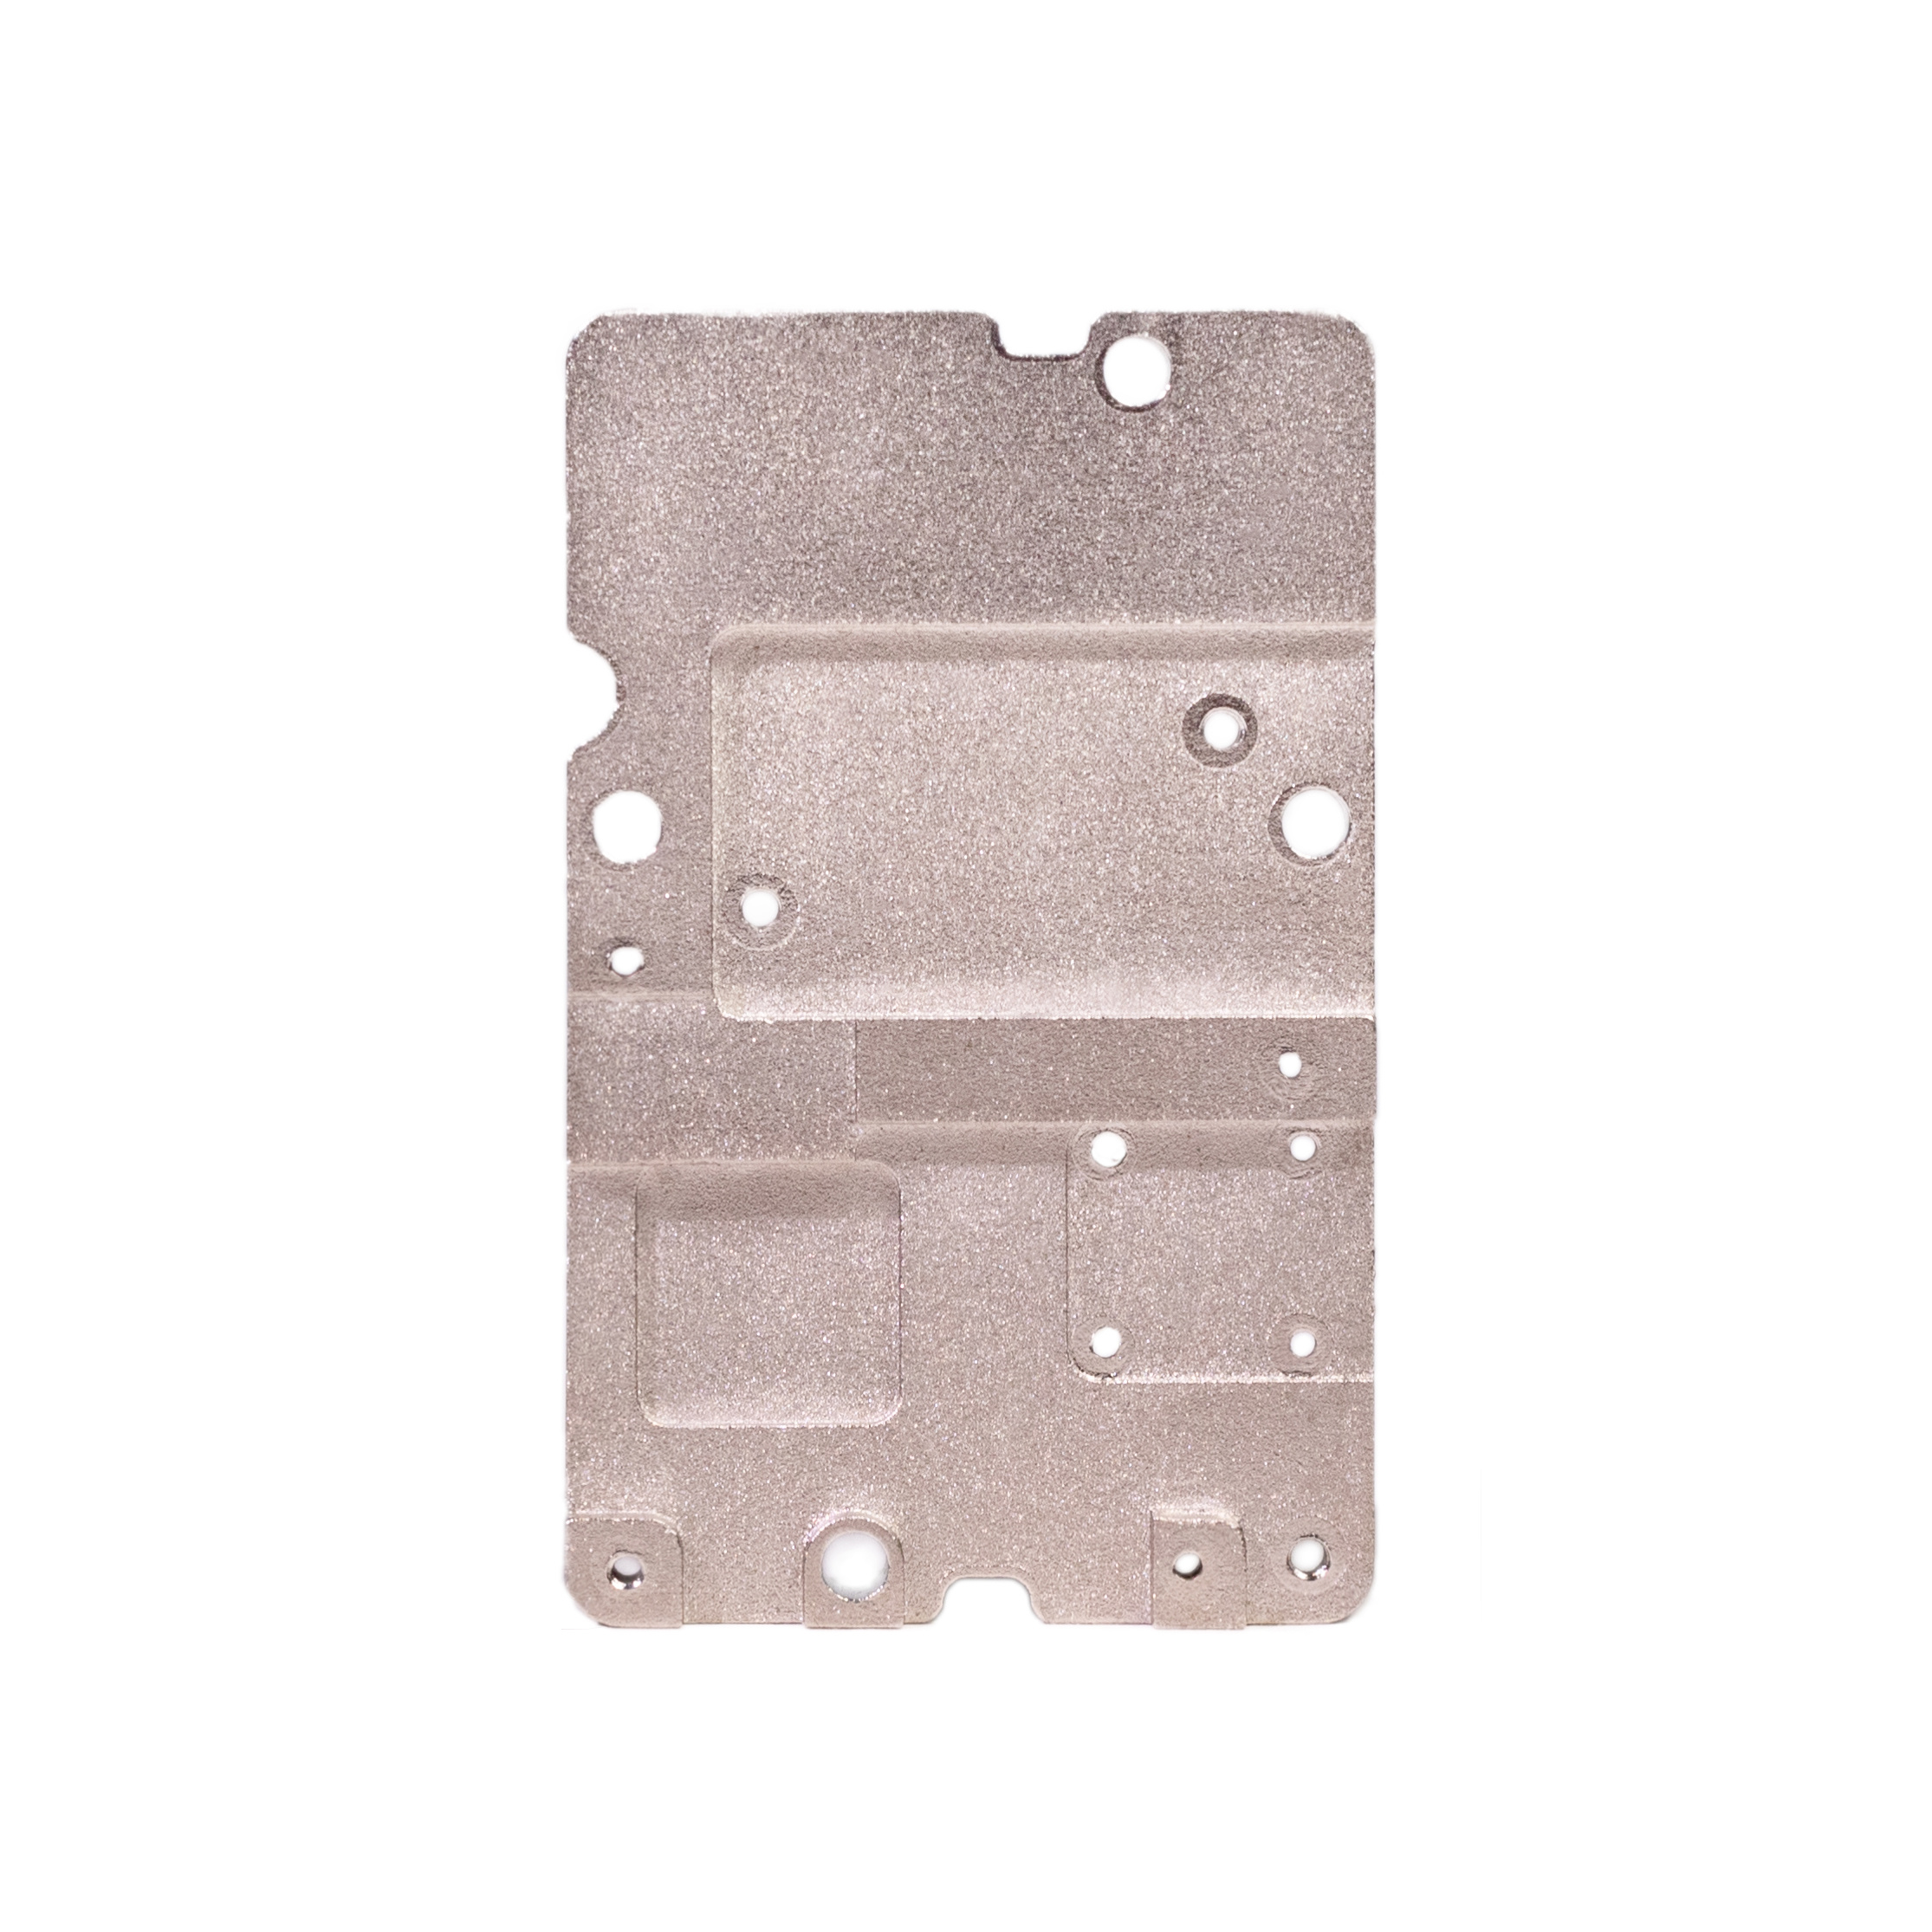 Cooling base plate 59.6x36.6x4.5